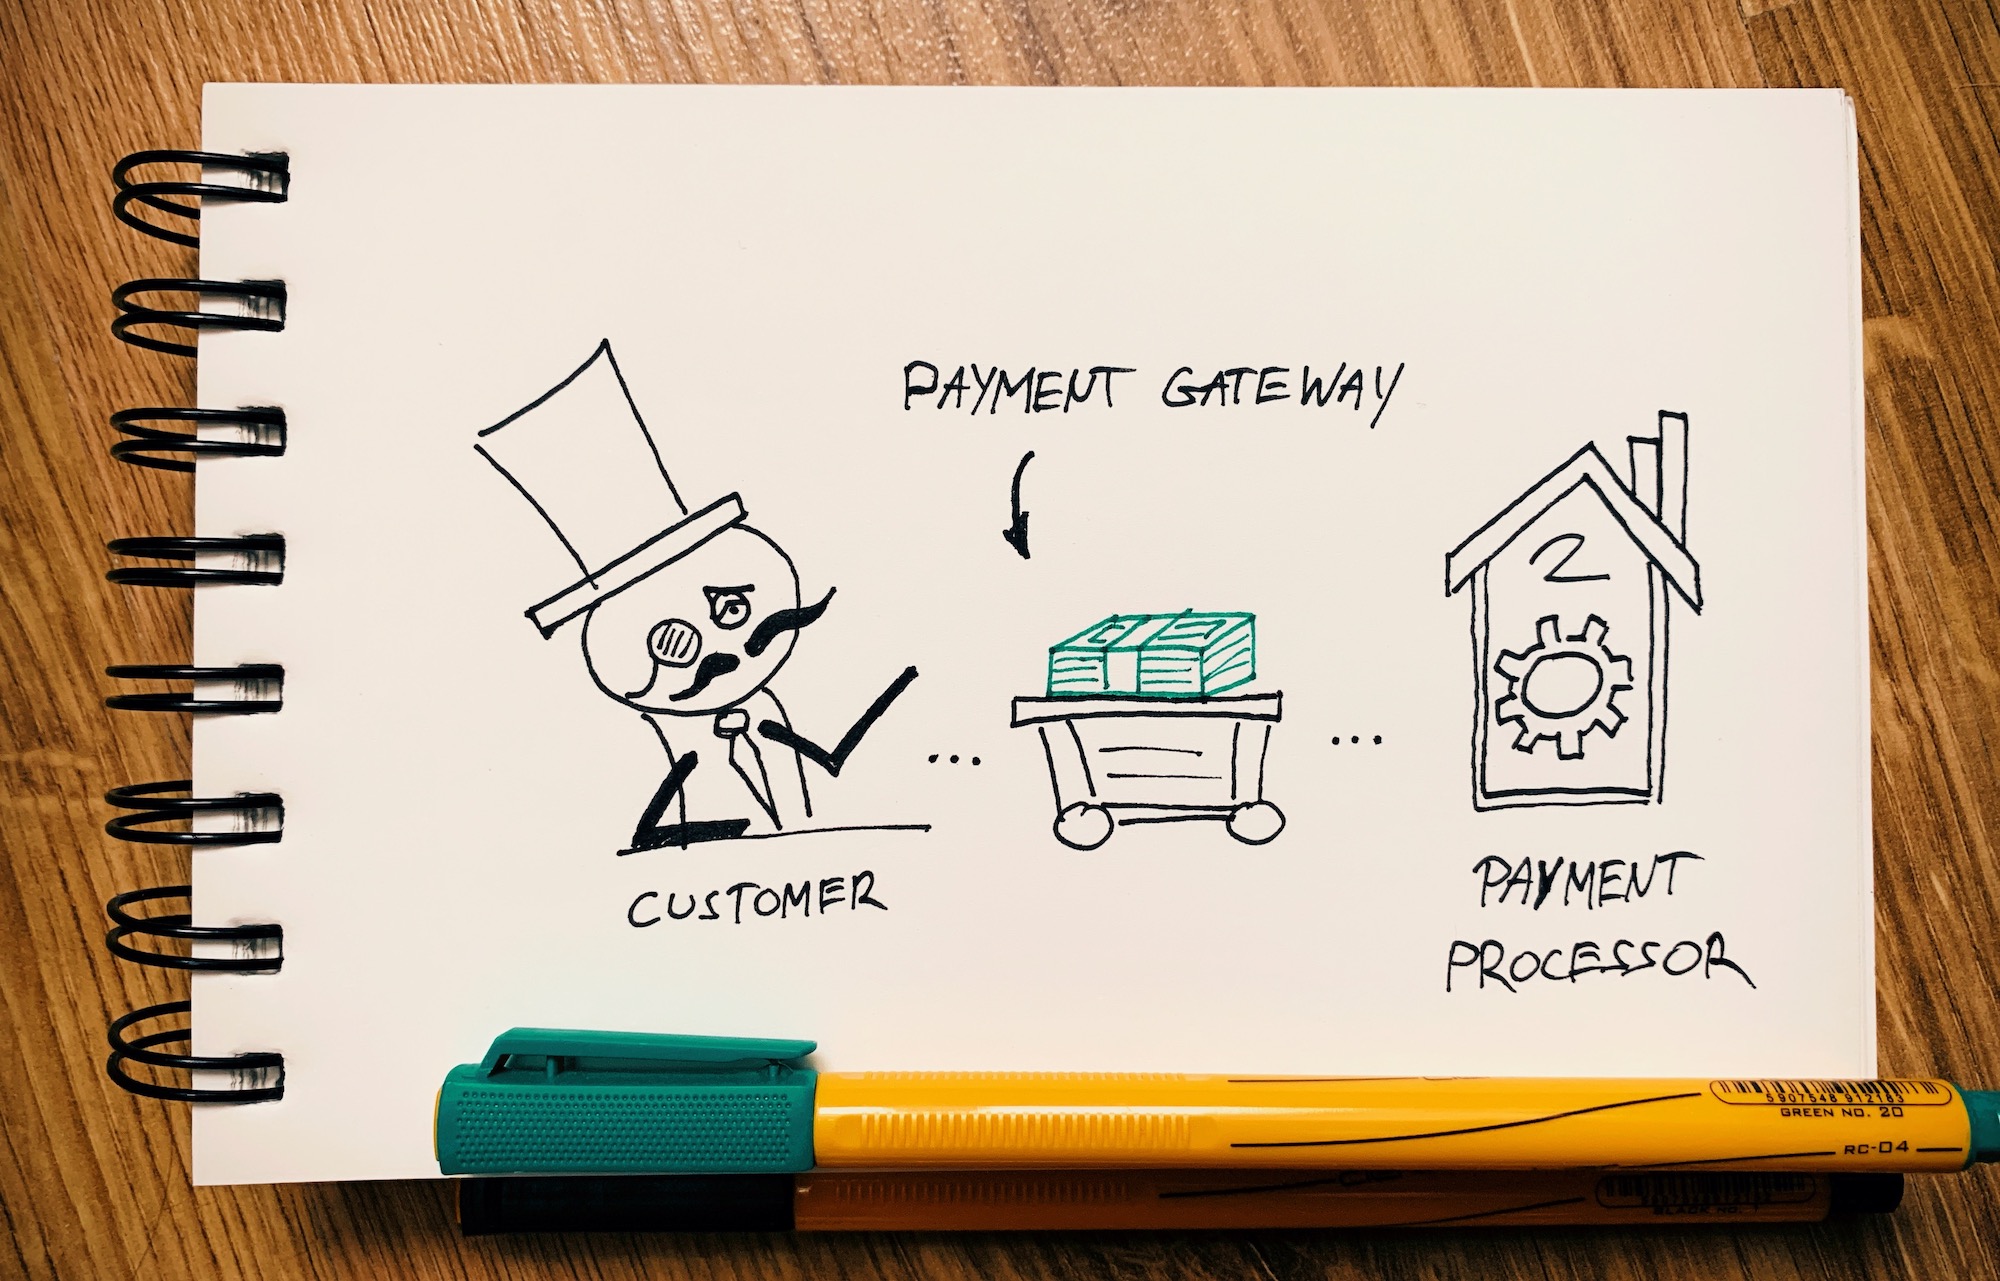 What is a payment gateway? 2020 best payment gateways compared to 5 years